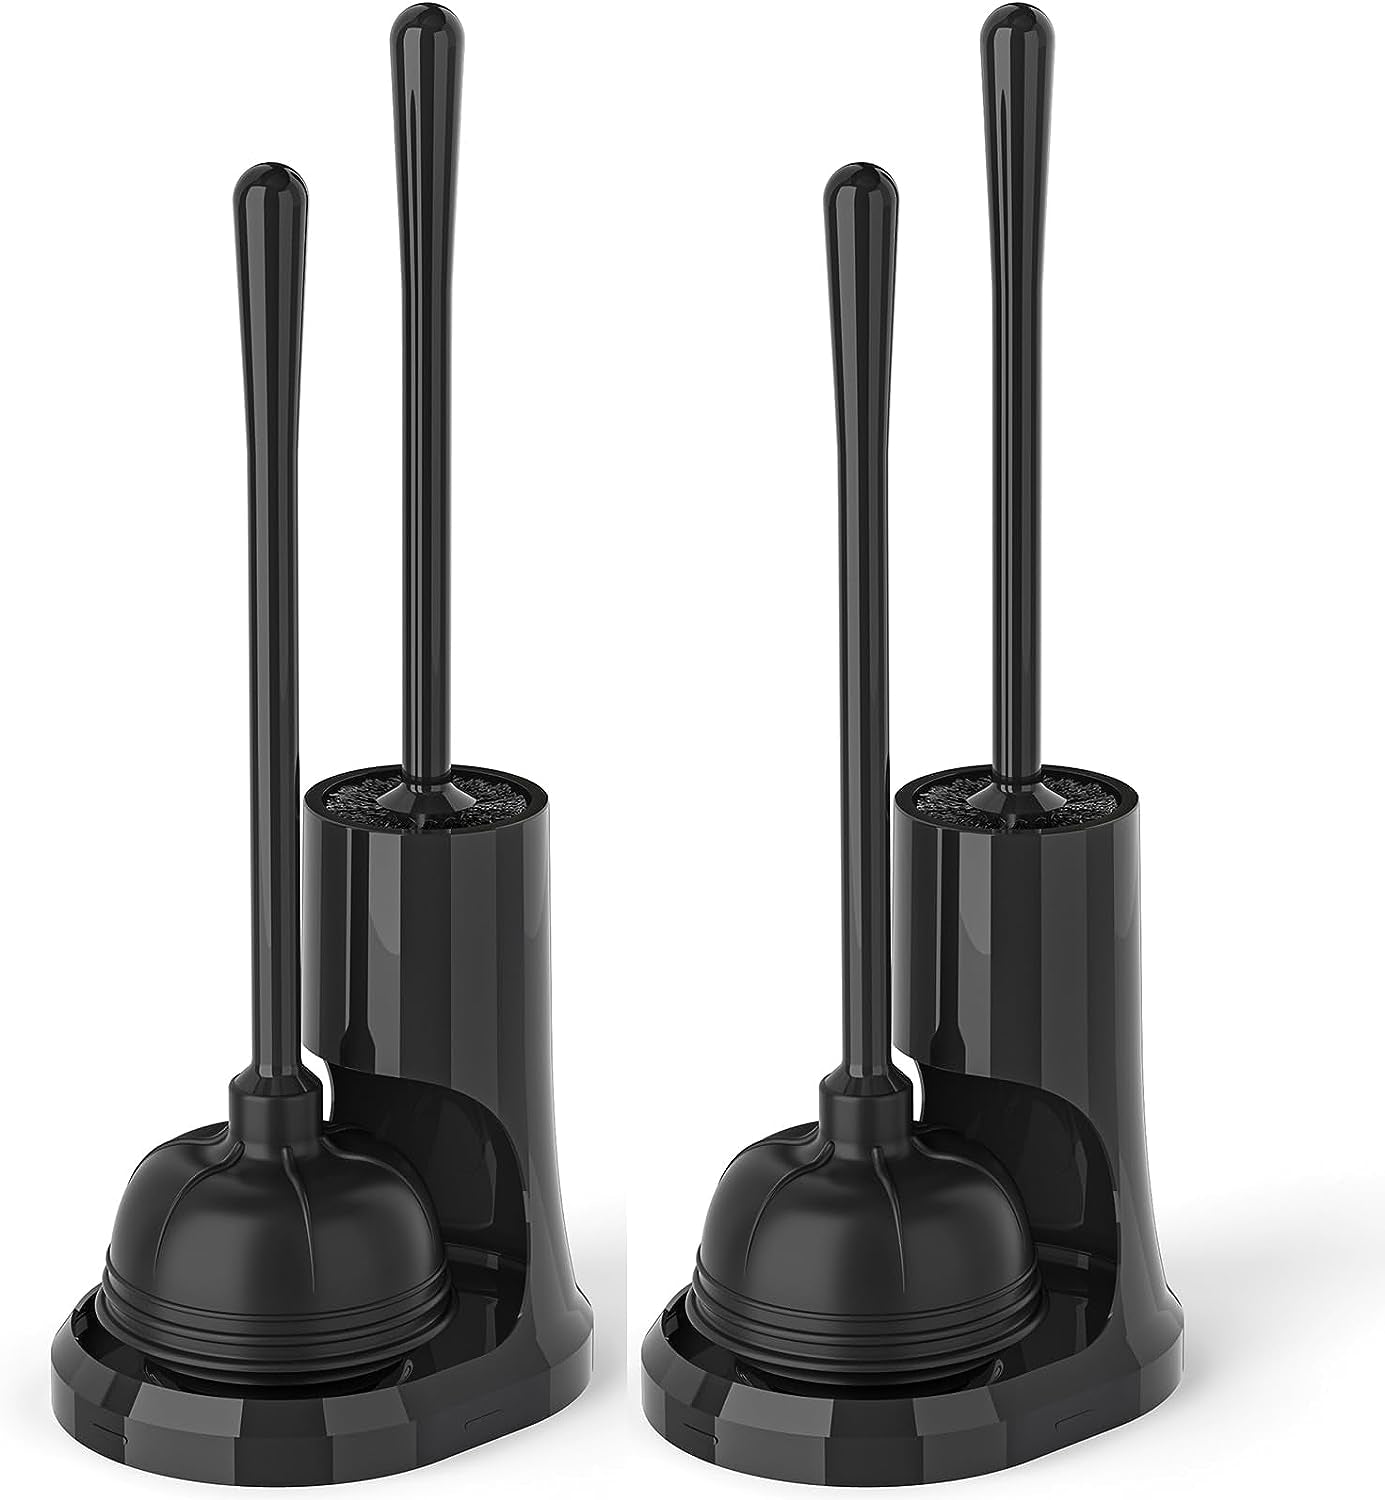 Toilet Plunger and Brush, Bowl Brush and Heavy Duty Toilet Plunger Set with Holder, 2-In-1 Bathroom Cleaning Combo with Modern Caddy Stand (Black, 2 Set)